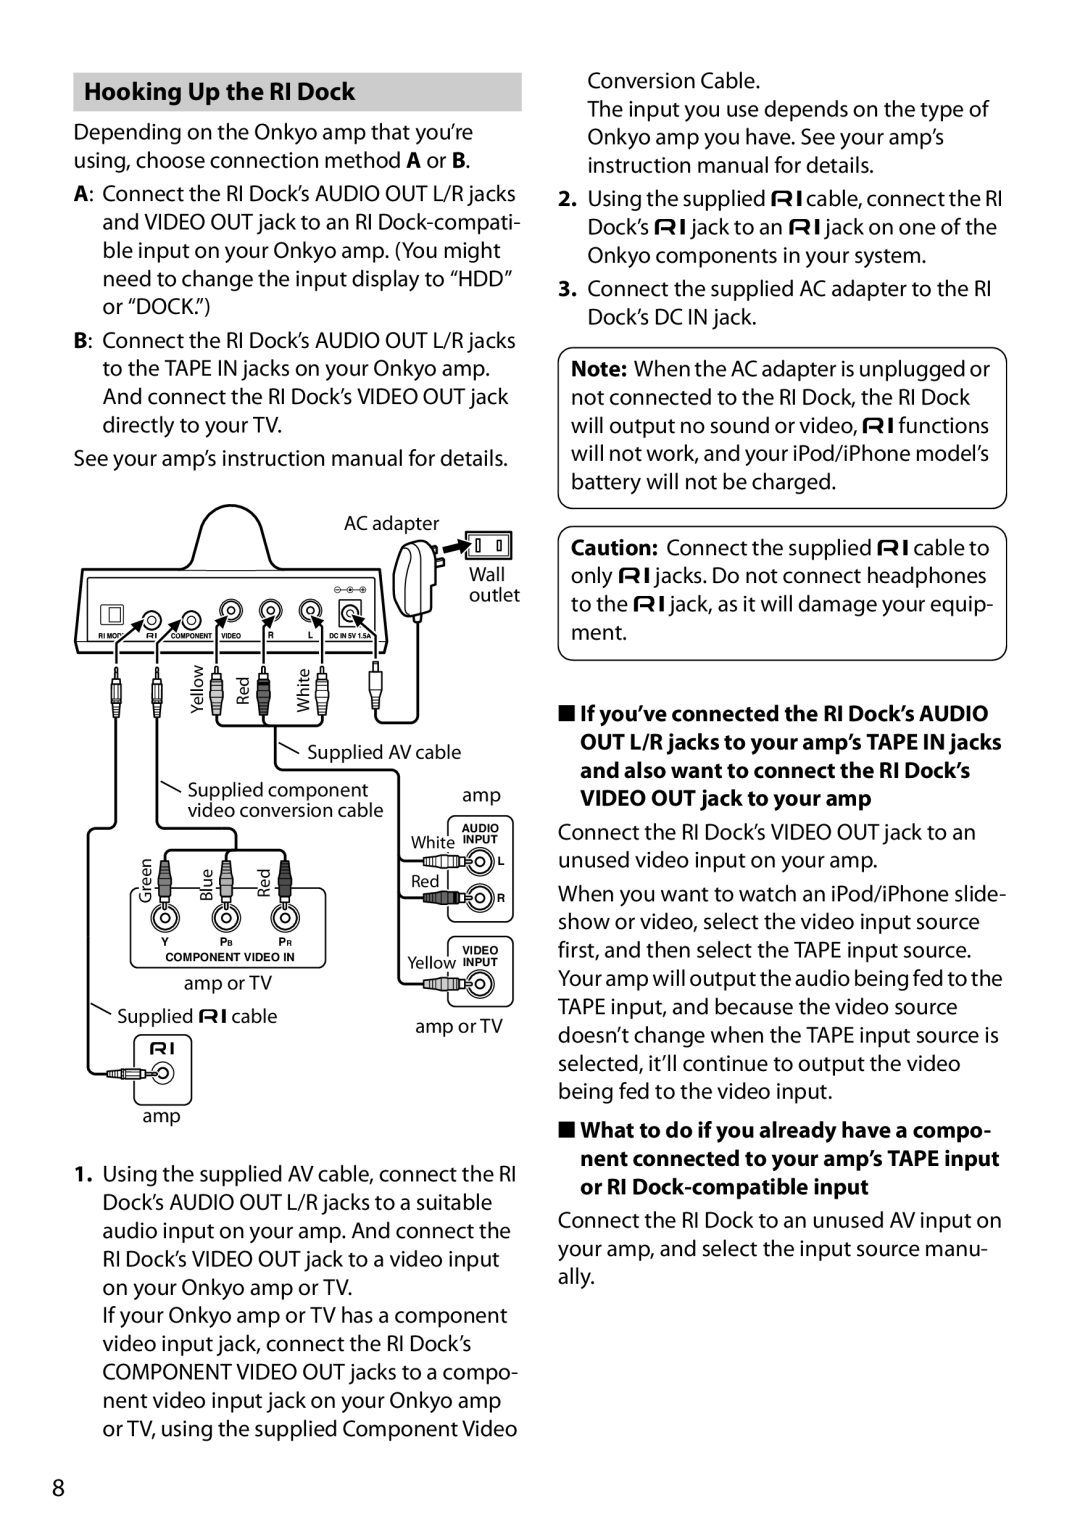 Onkyo DS-A4 instruction manual Hooking Up the RI Dock, and also want to connect the RI Dock’s 